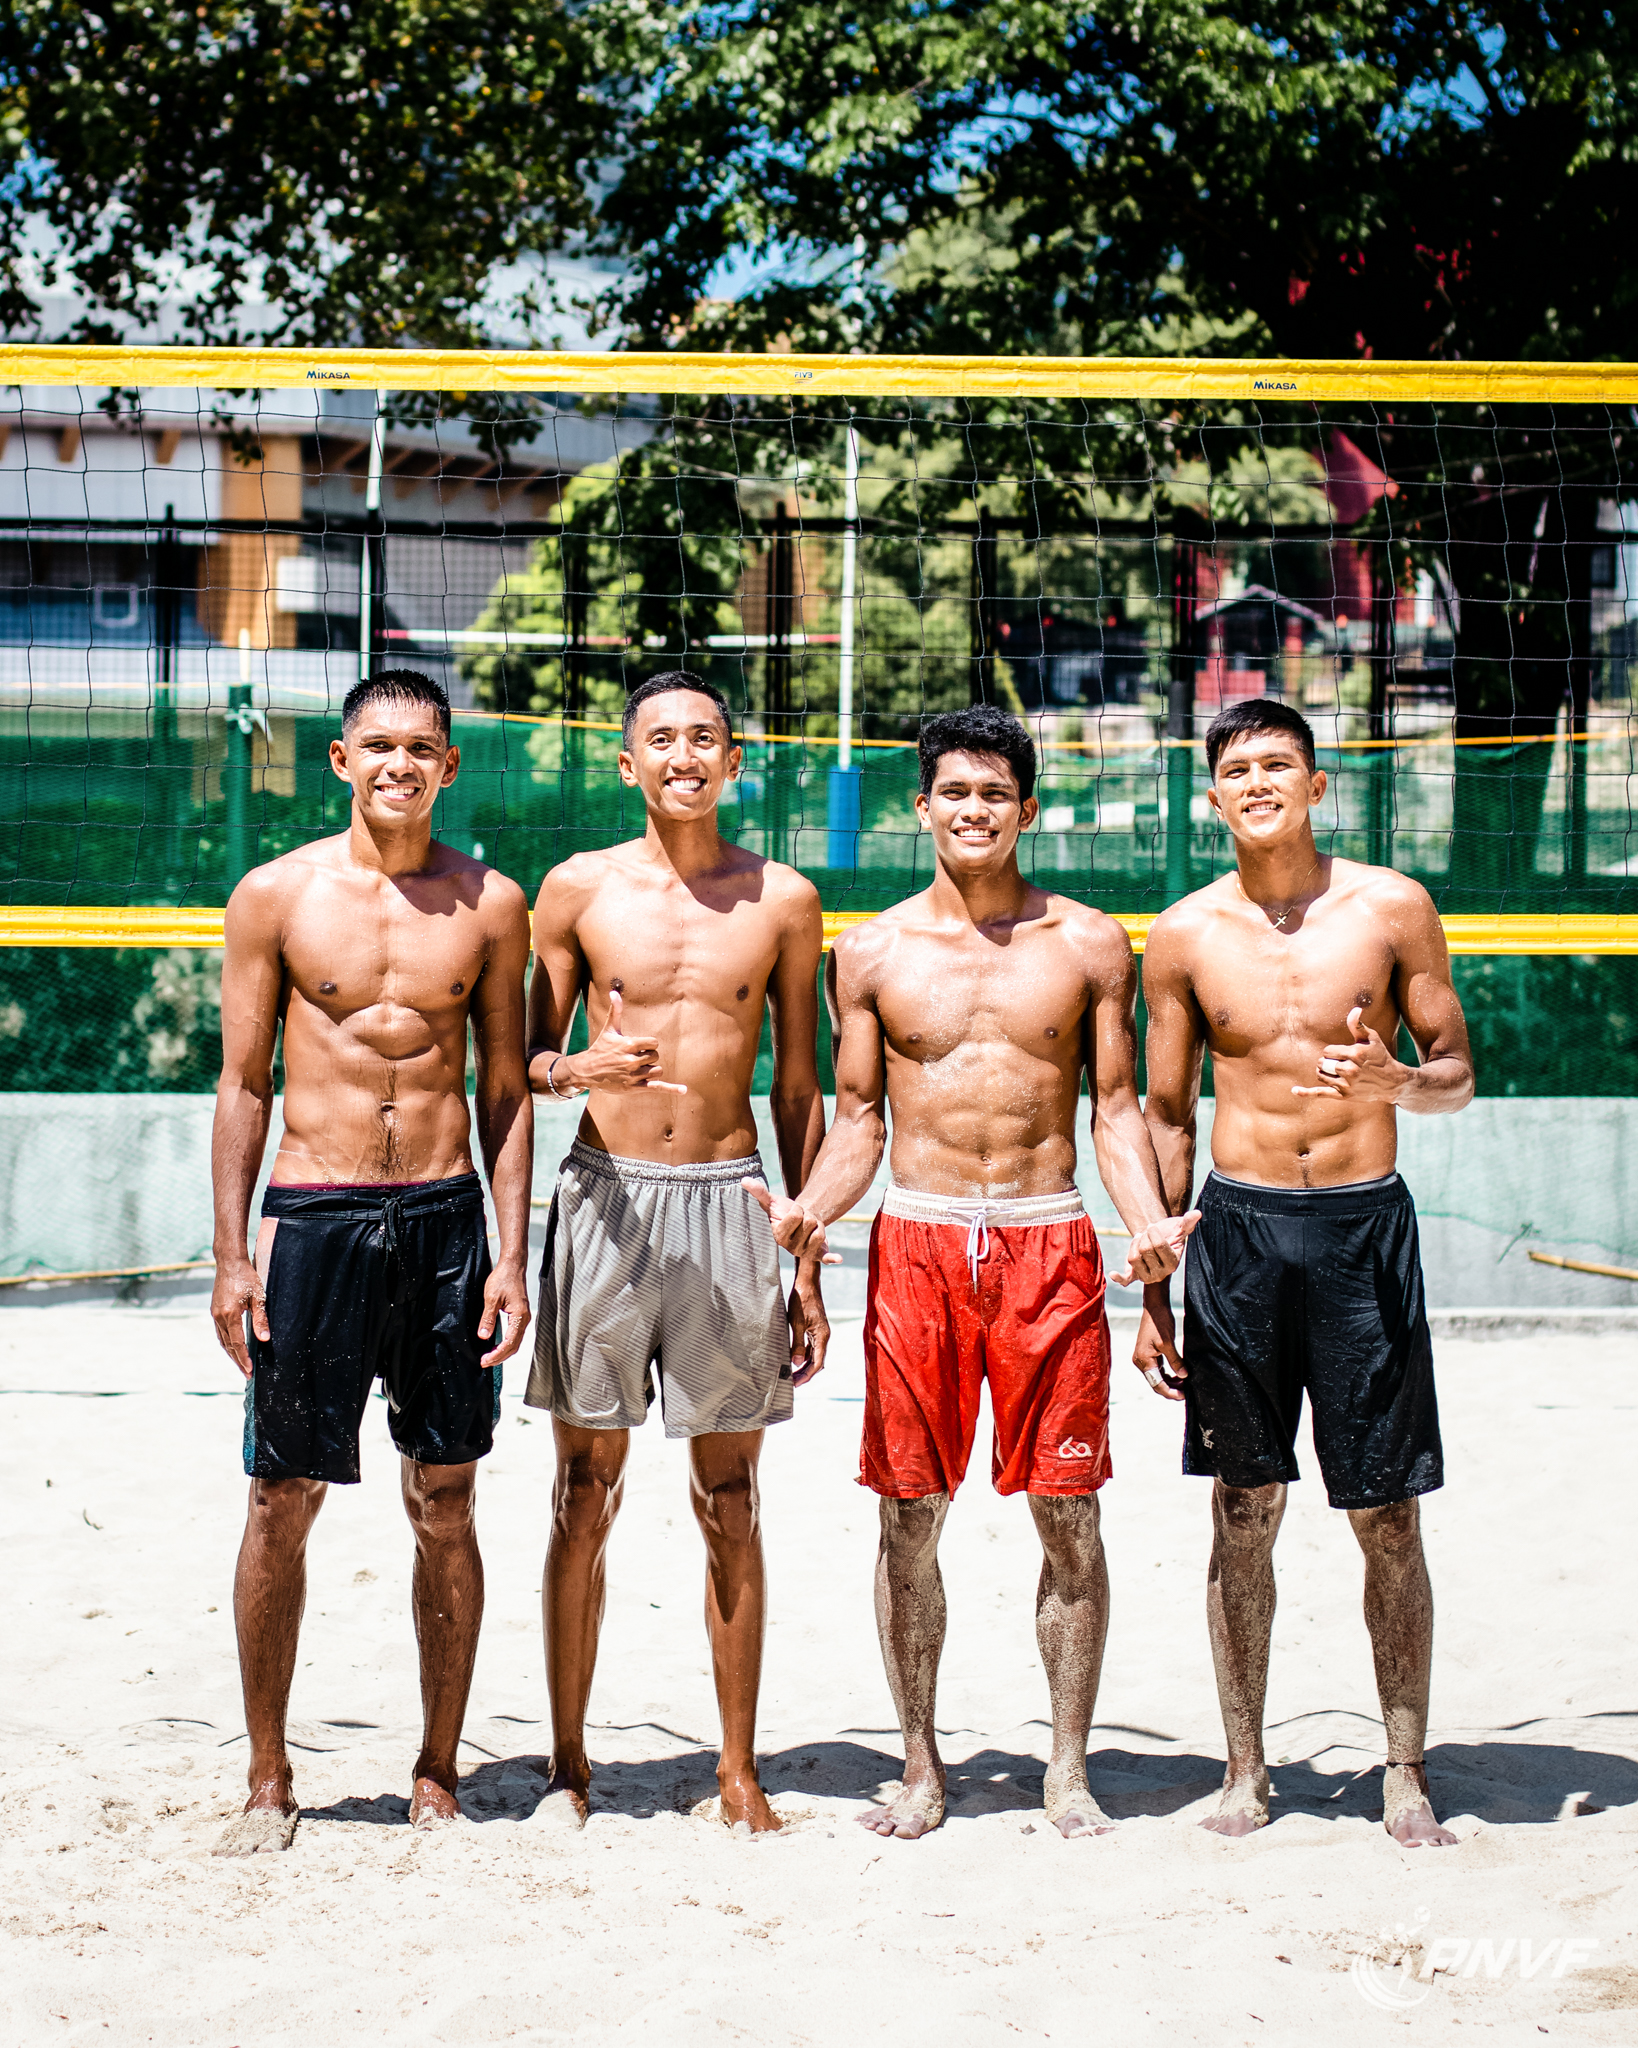 Sea Games 2023 Ph Mens Beach Volleyball Team Bags Another Bronze Medal Inquirer Sports 